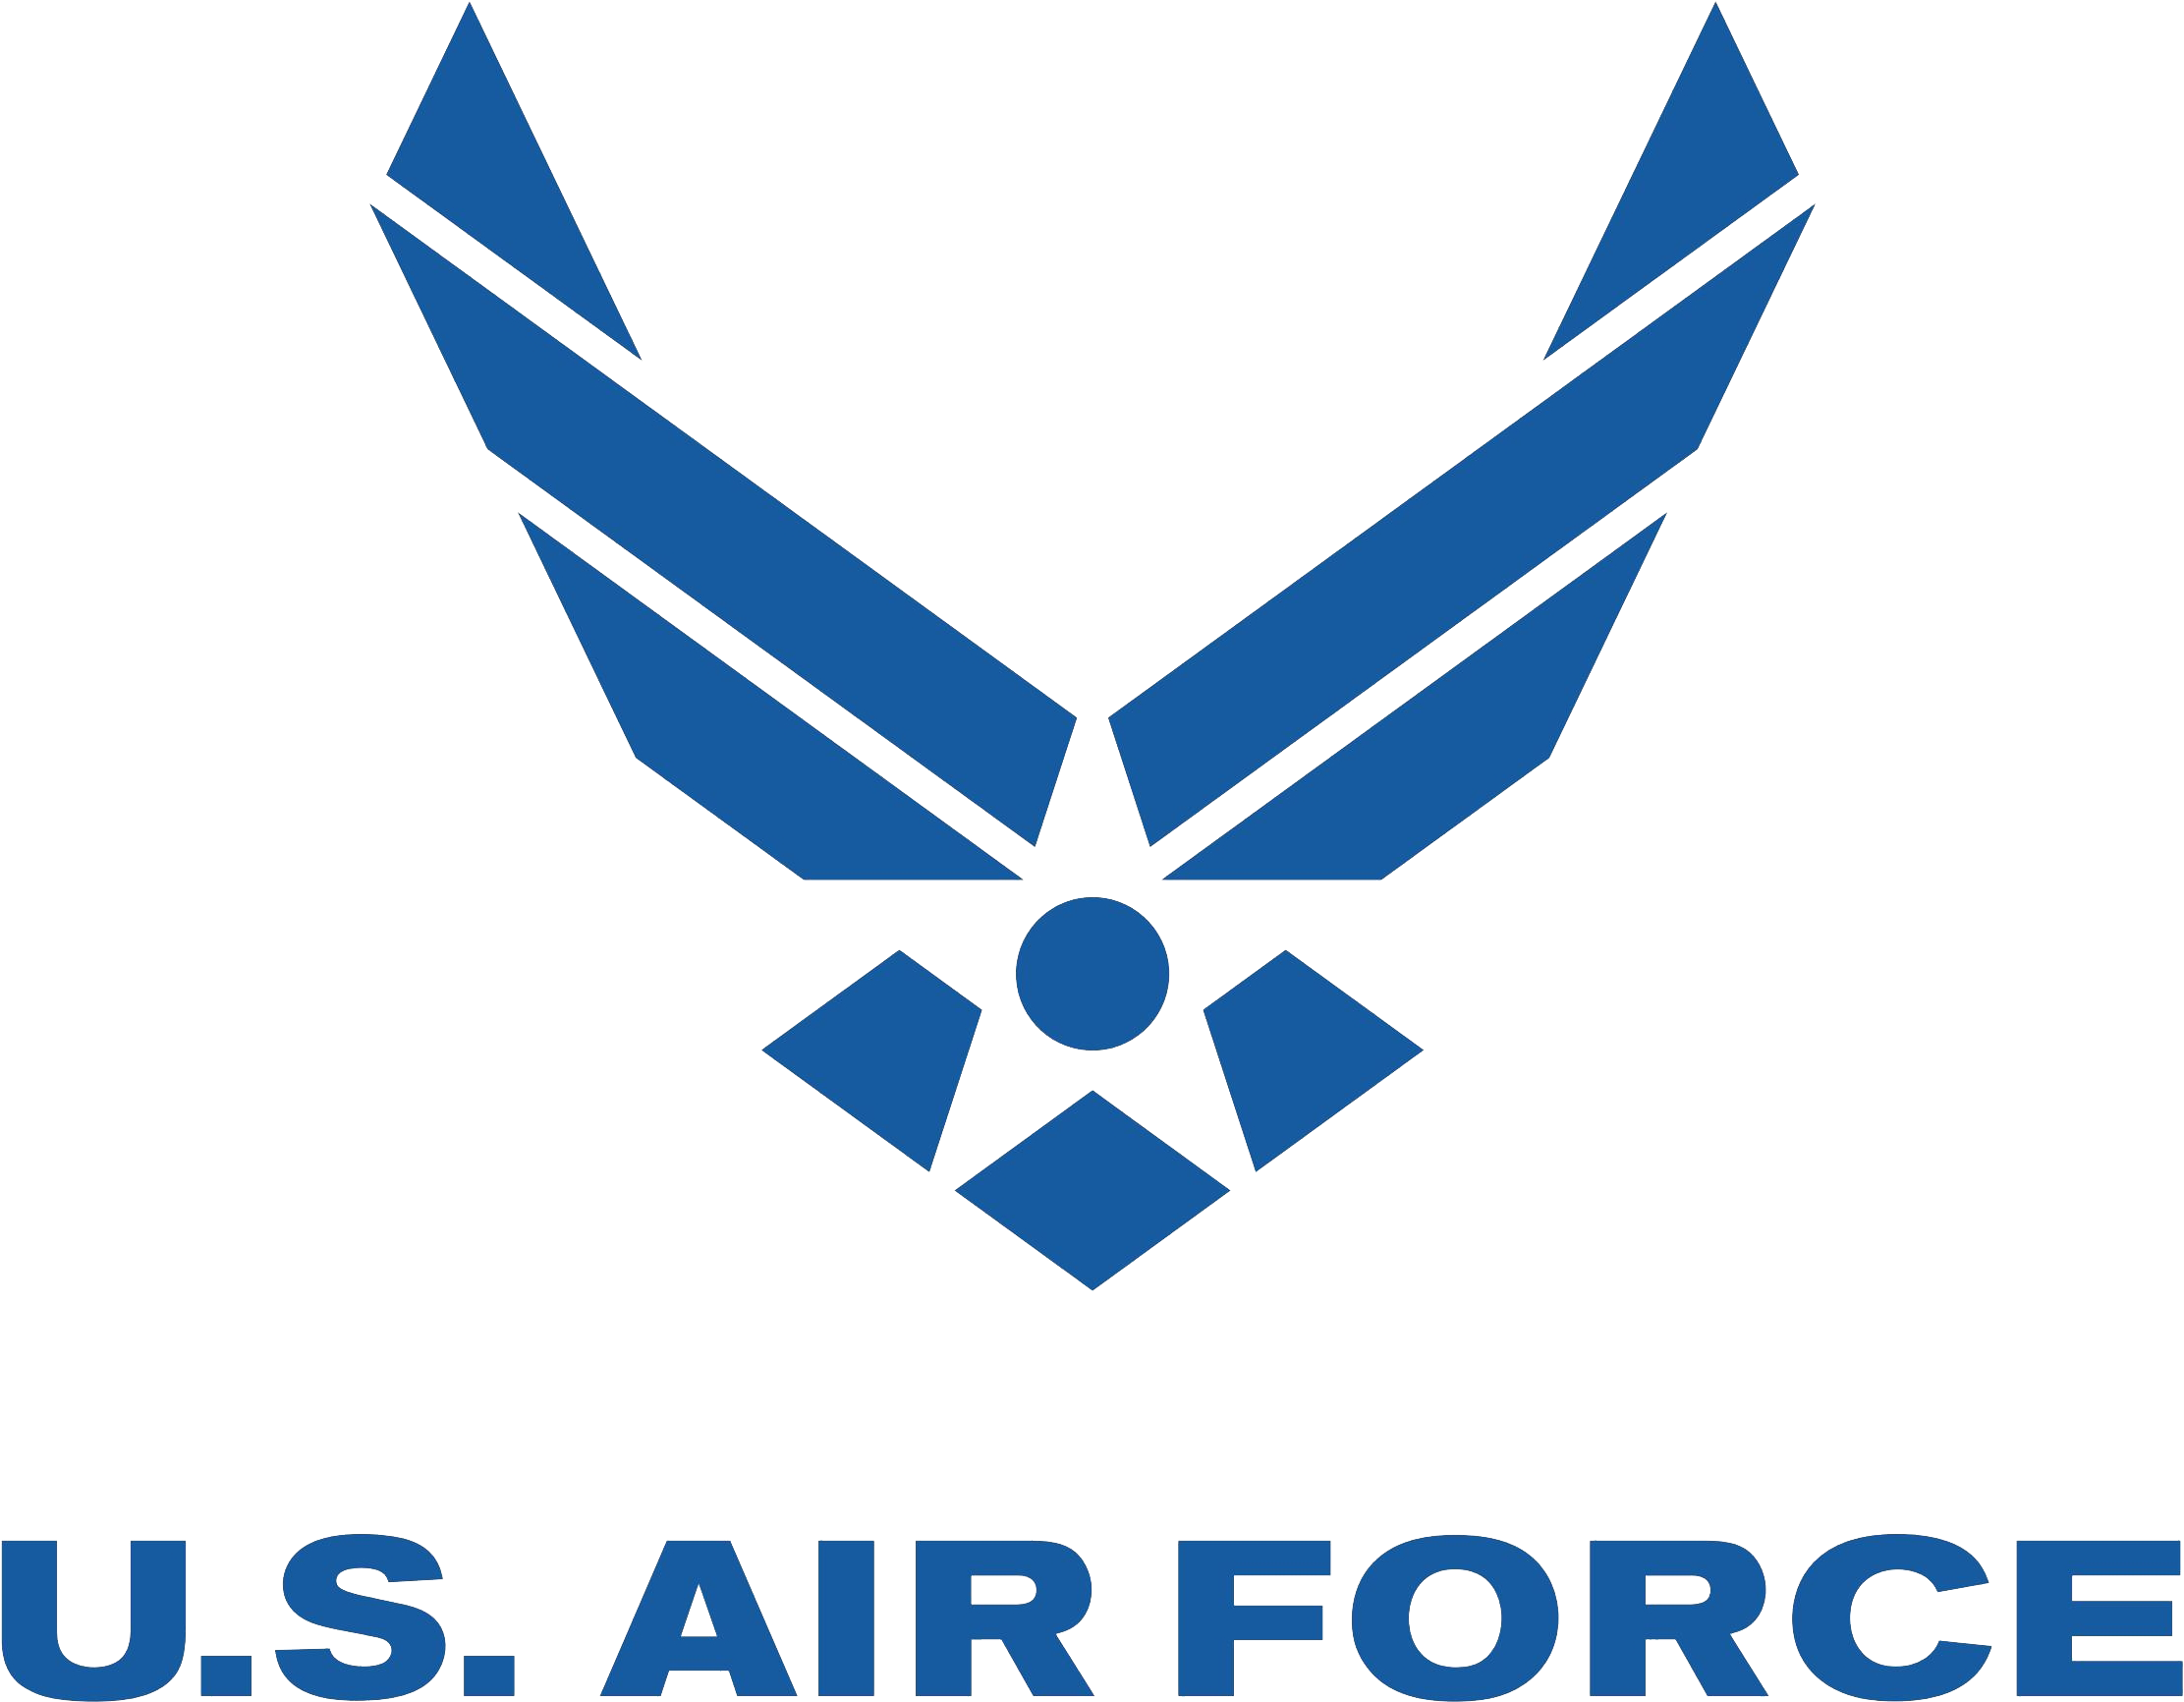 Home - United States Air Force Logo (2471x1856)